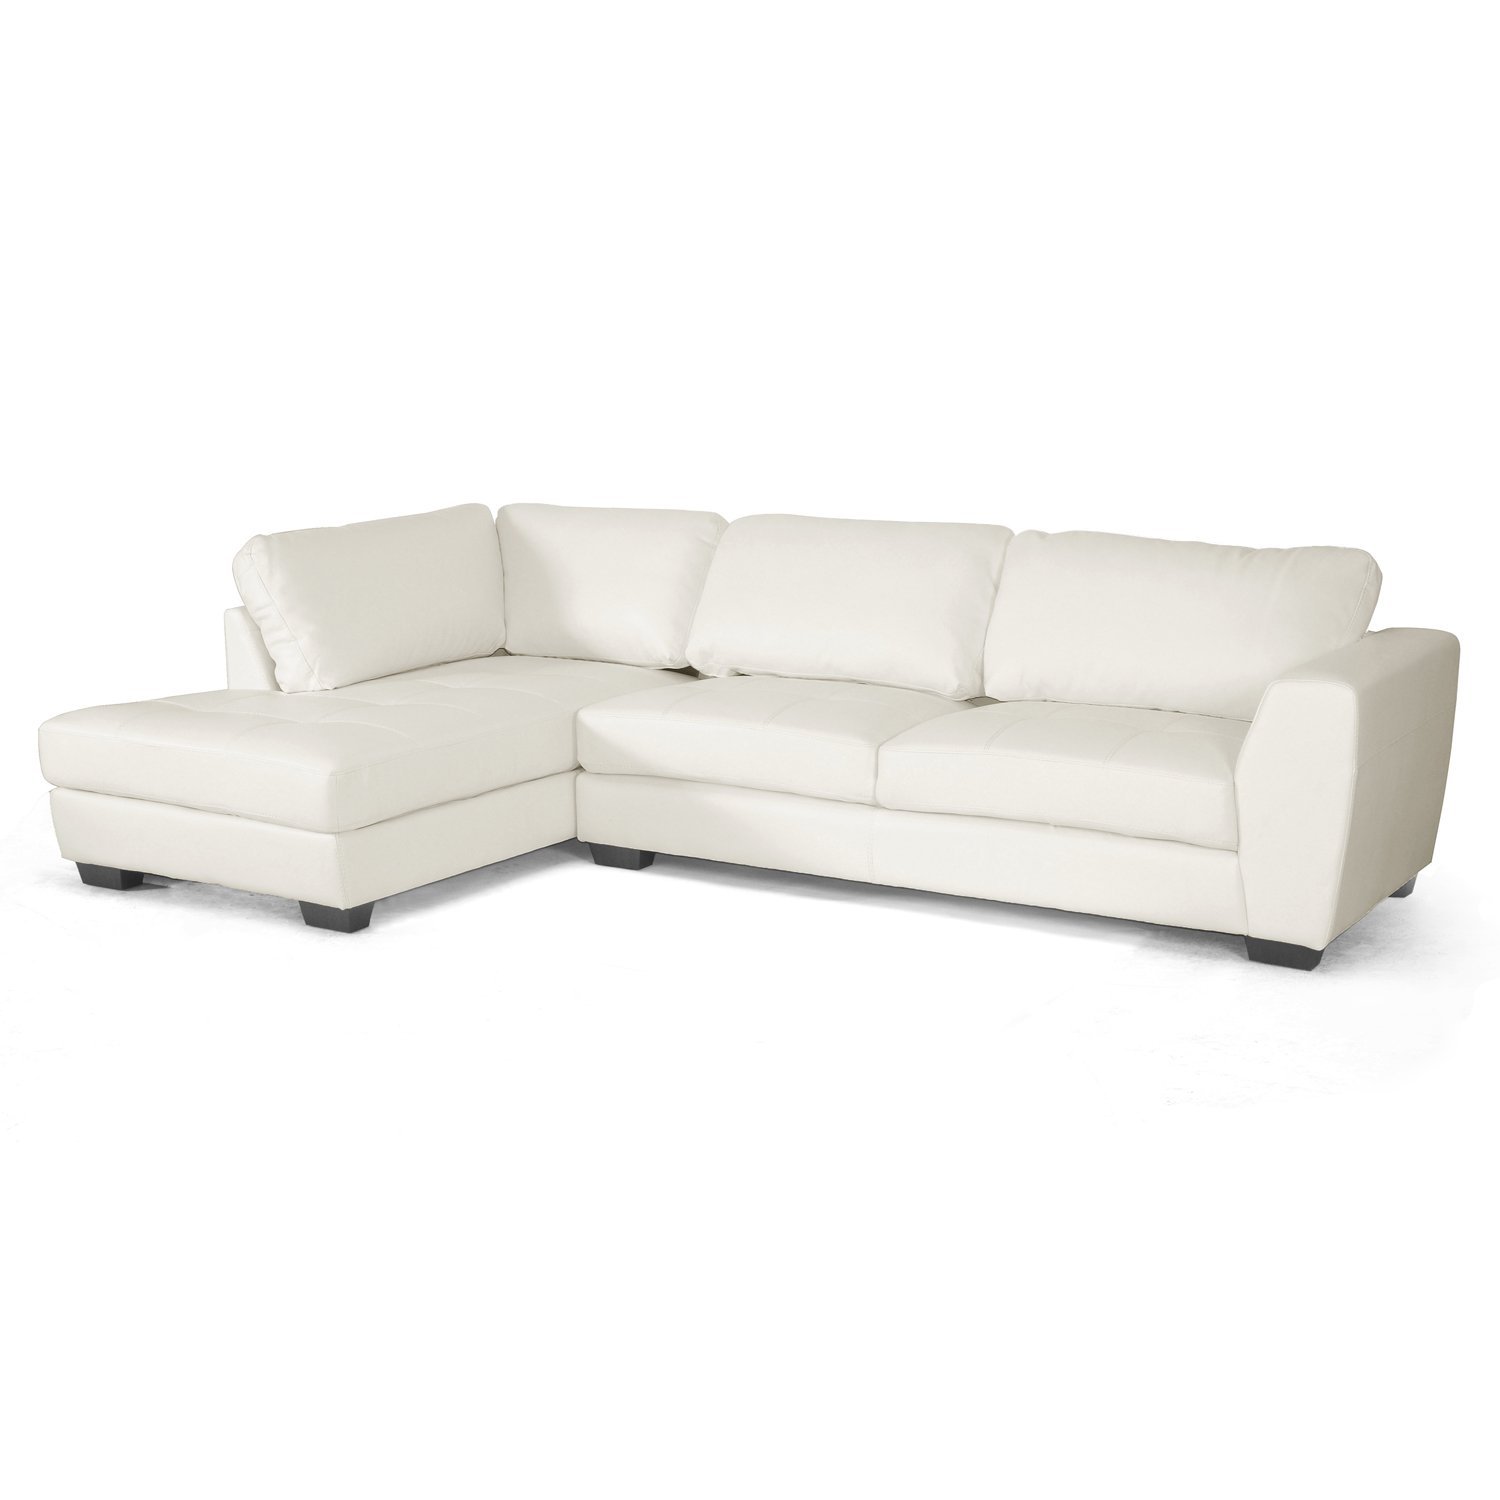 White Leather Sectional Couch1 